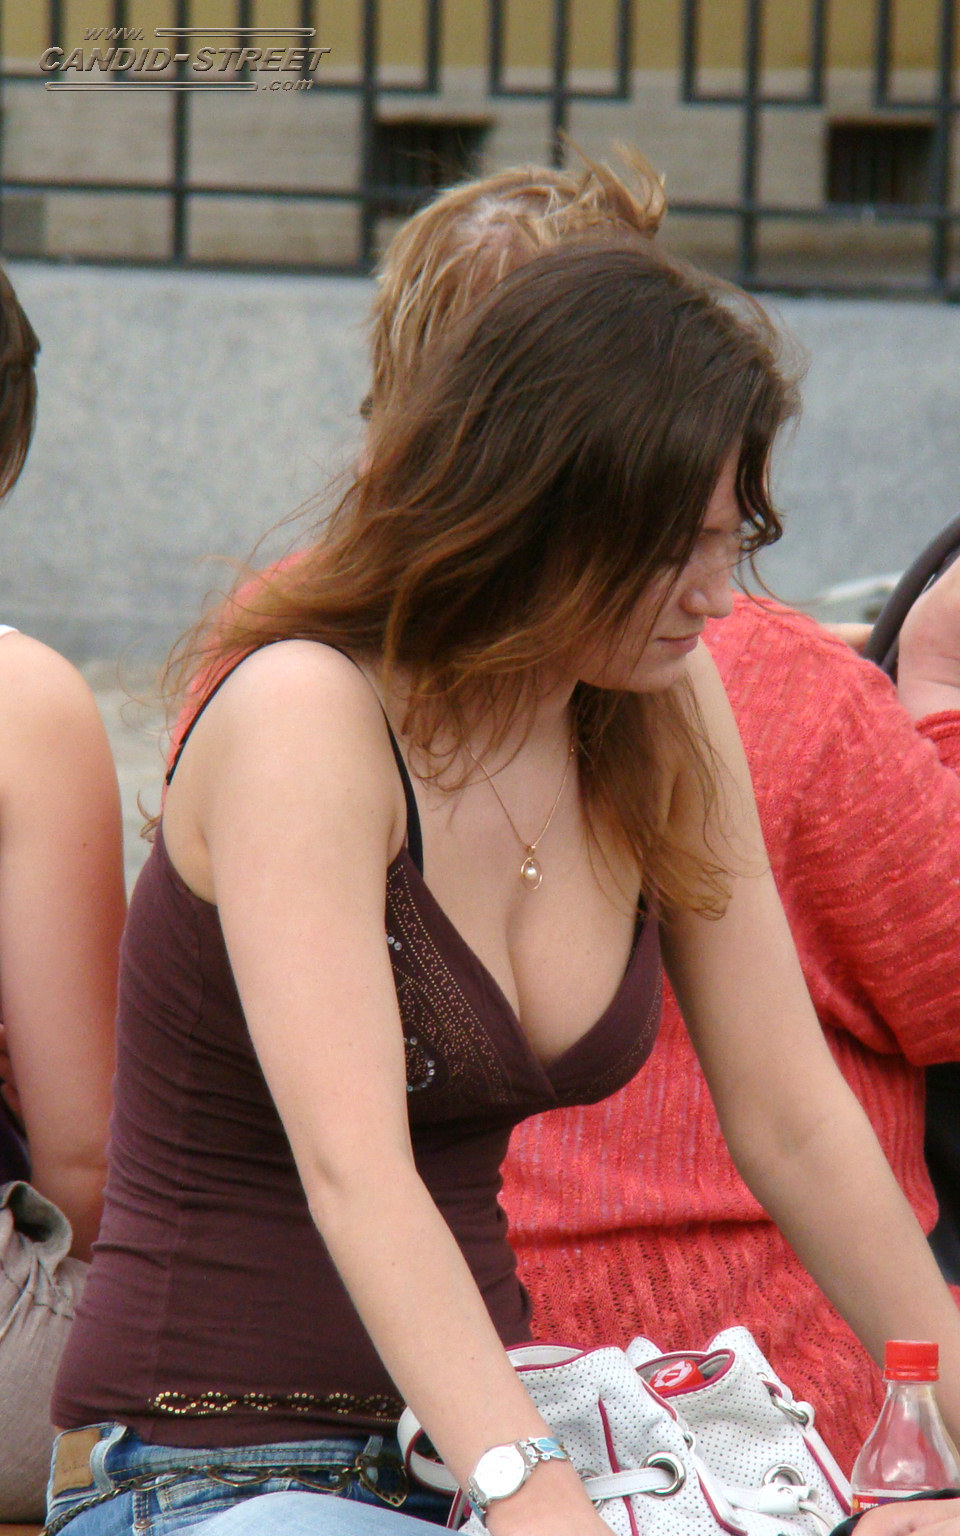 Busty girls candid shots - 19-dsc06640 from Candid Street